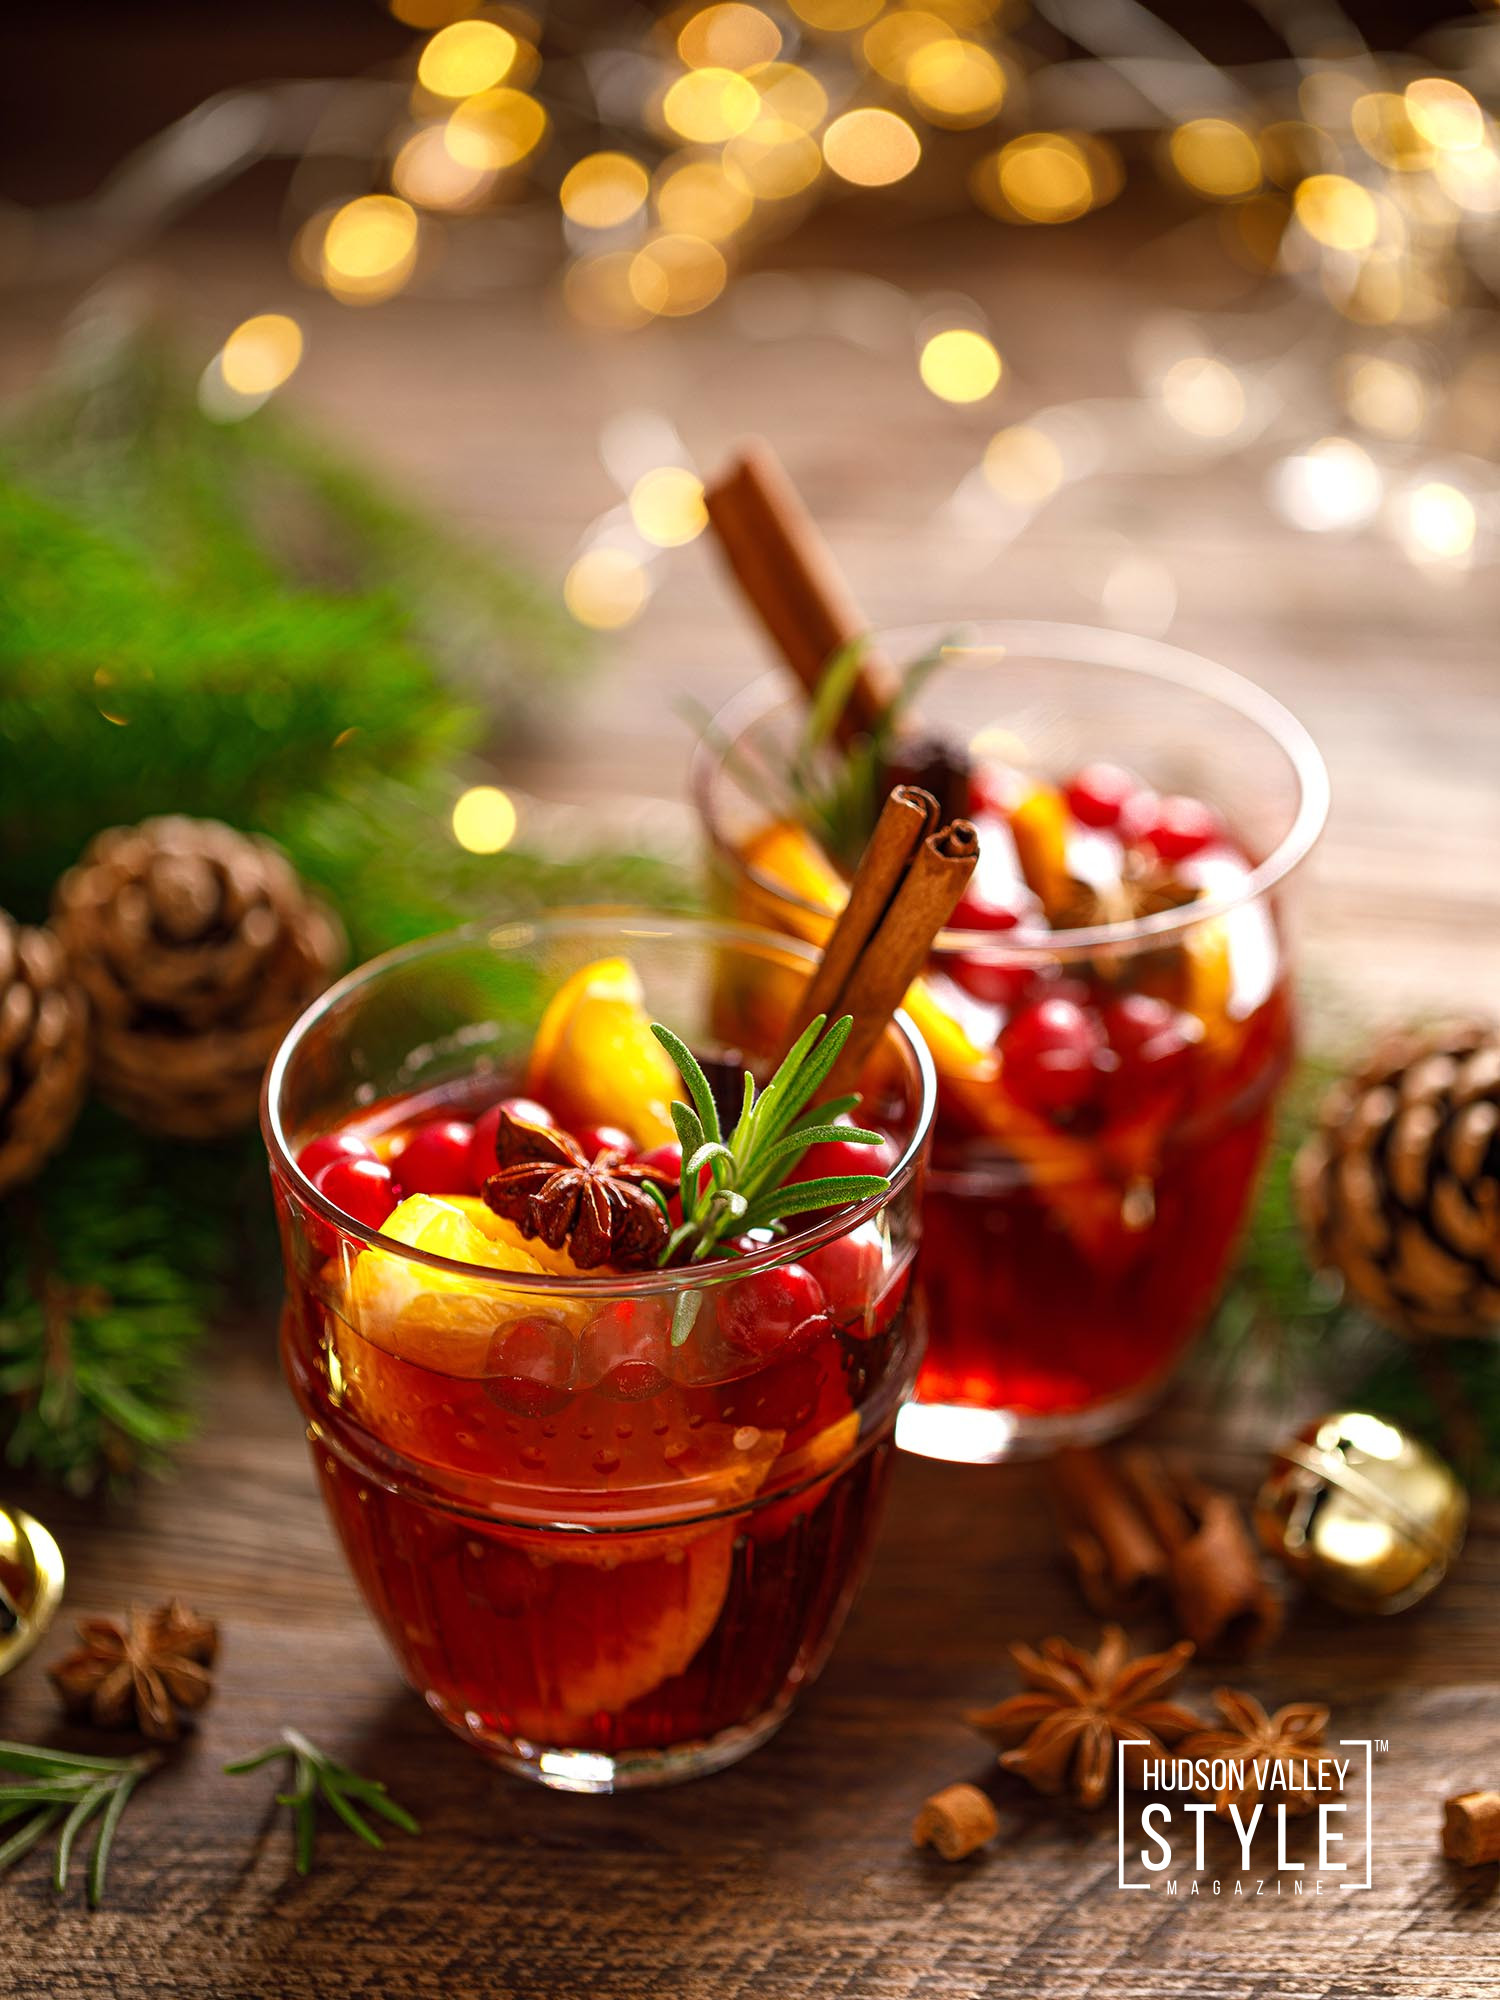 Get into the holiday spirit: Tips for gifting the perfect drinks for any occasion